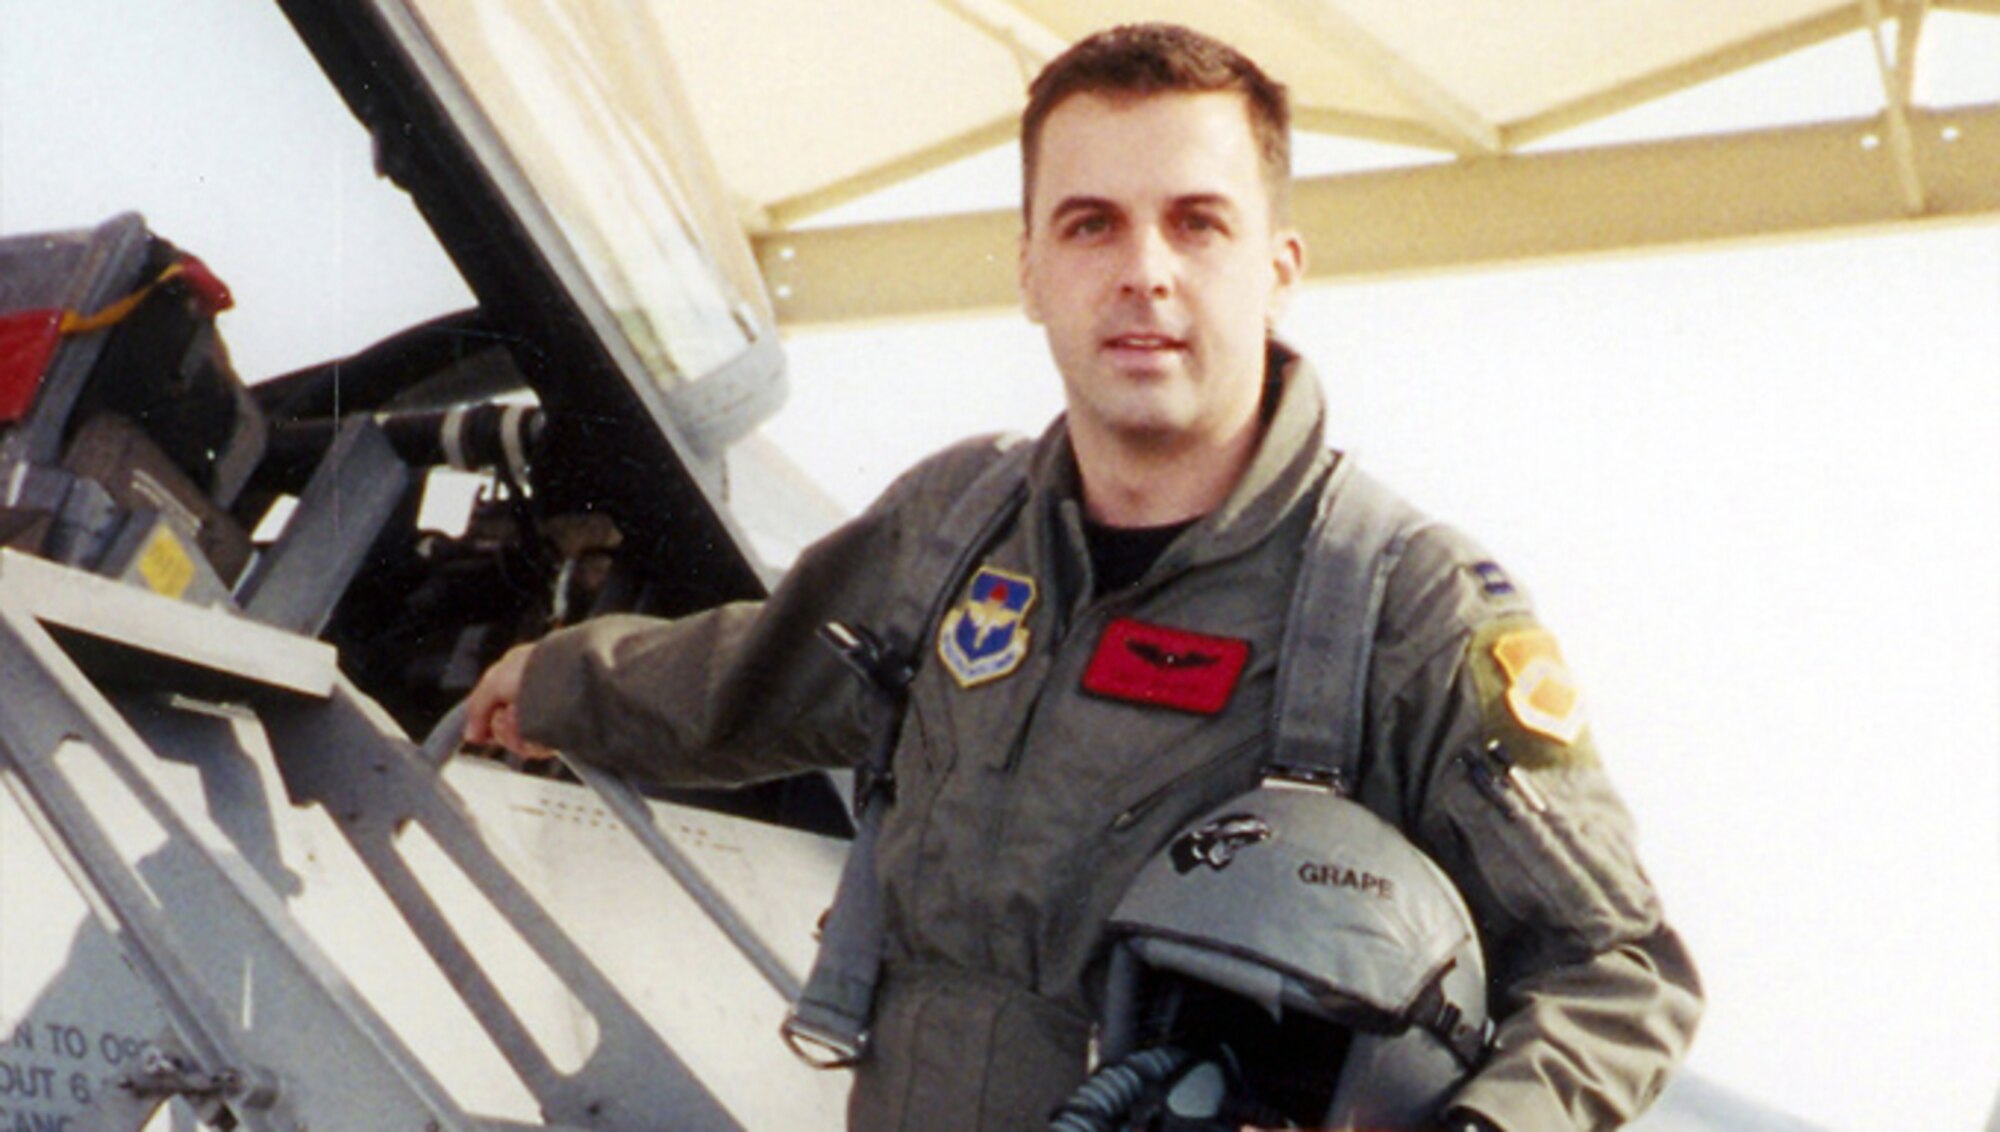 Maj. Troy Gilbert, an F-16 Fighting Falcon pilot, was killed Nov. 27, 2006, in an F-16 crash 30 miles southwest of Balad Air Base, Iraq.  Gilbert was the standardization and evaluation chief for the 332nd Expeditionary Operations Group and was deployed from the 309th Fighter Squadron from Luke Air Force Base, Ariz. (Courtesy photo)